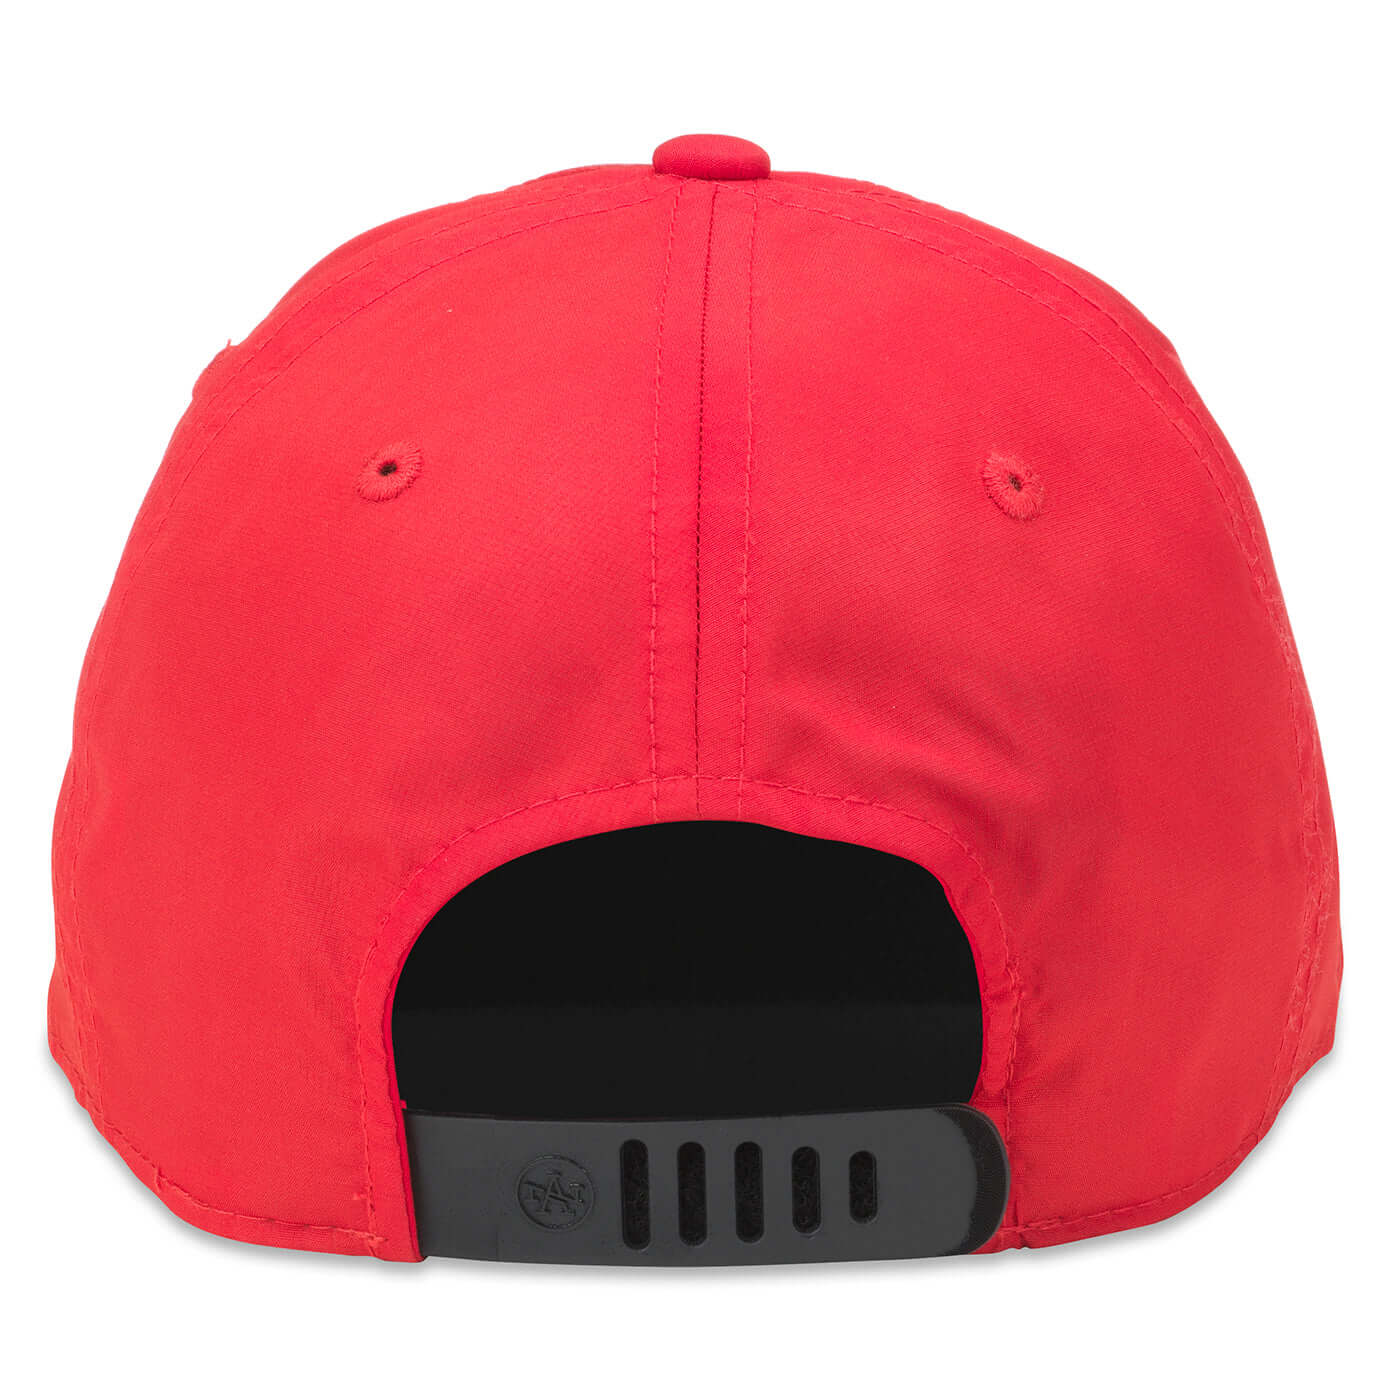 TKO Strength & Performance Hats: Red/Black Logo Hat With Velcro Strap | Workout